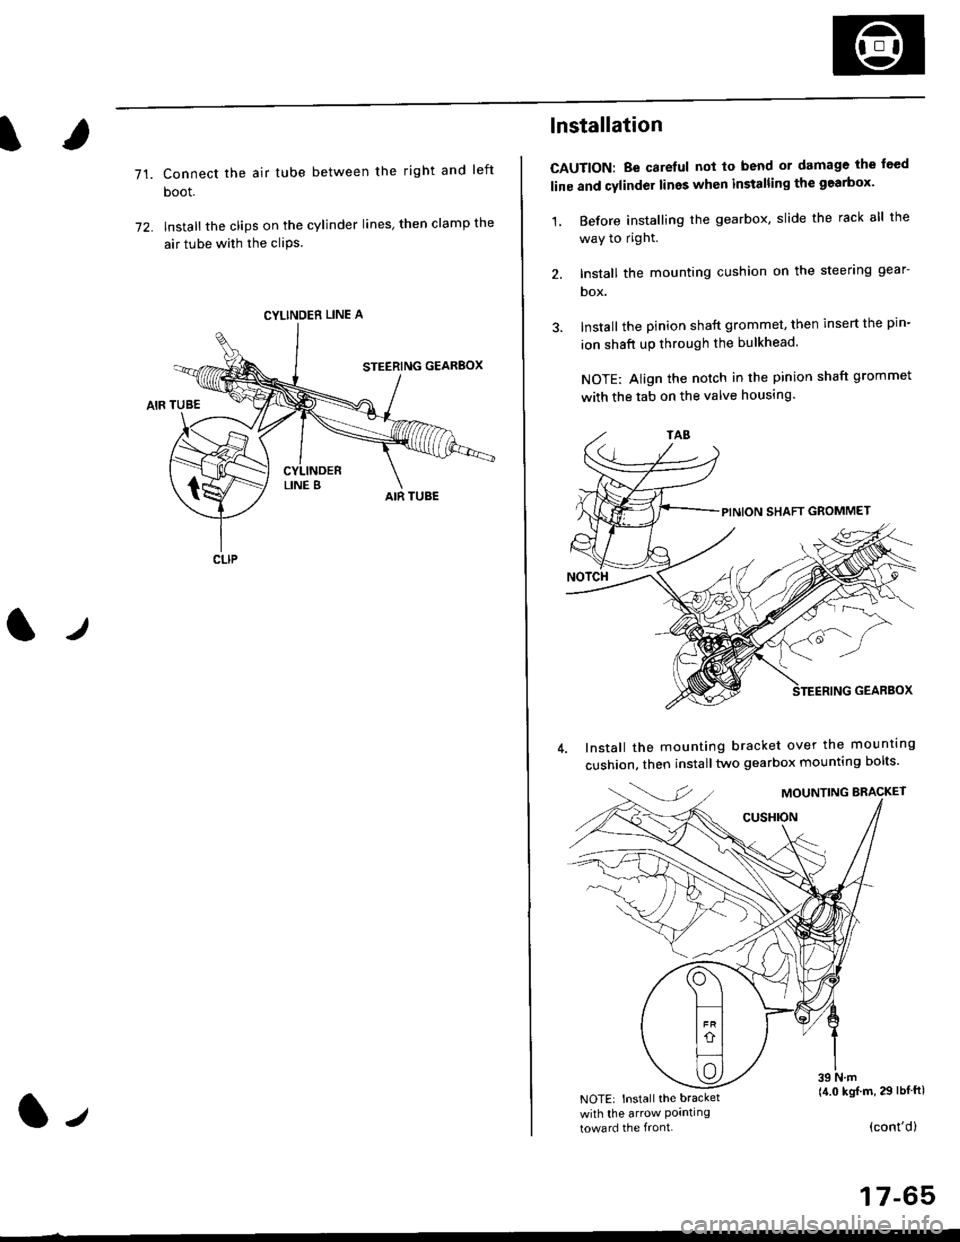 HONDA CIVIC 1996 6.G Service Manual 71.Connect the air tube between the right and left
boot.
lnstall the clips on the cylinder lines then clamp the
air tube with the cliPs.
l./
CYLINDER LINE A
CLIP
l-,
lnstallation
CAUTION: Be carelul 